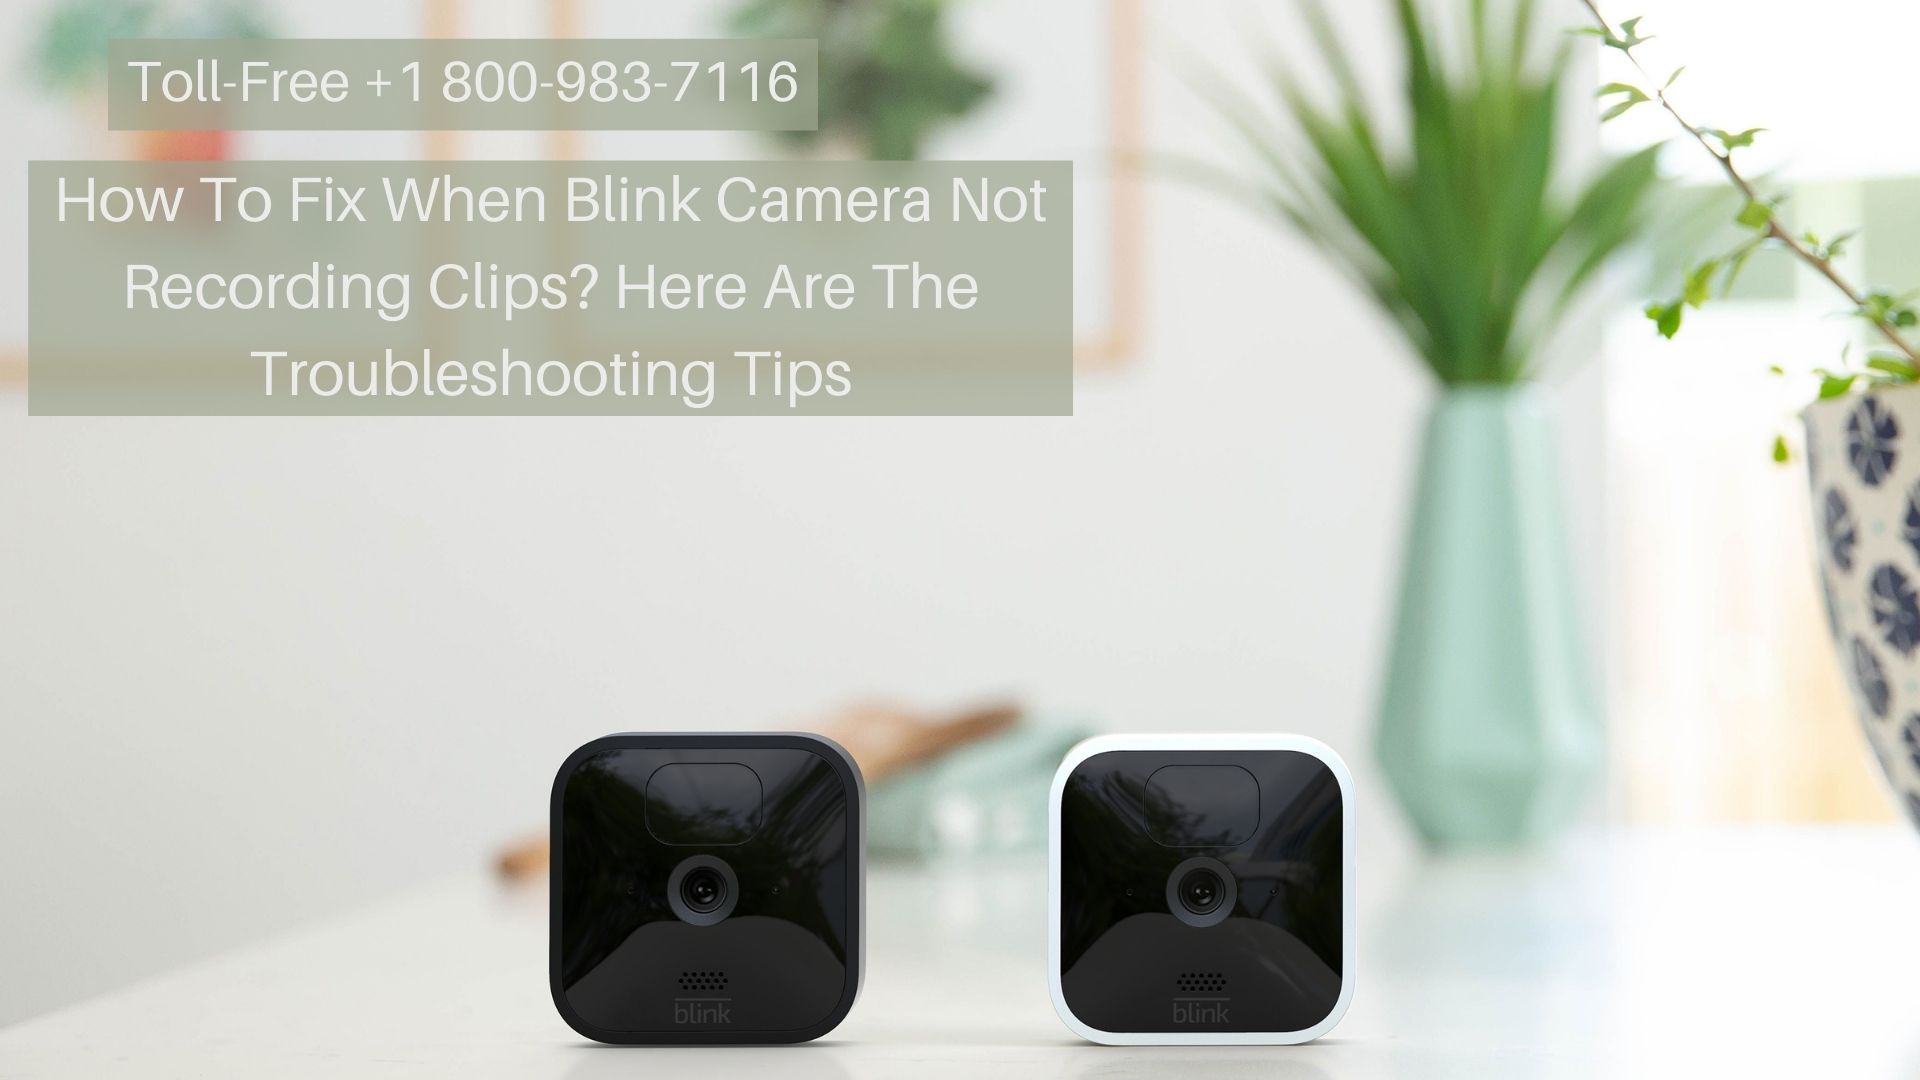 Why Is My Blink Camera Not Recording 1-8009837116 Blink Camera Not Detecting Motion?